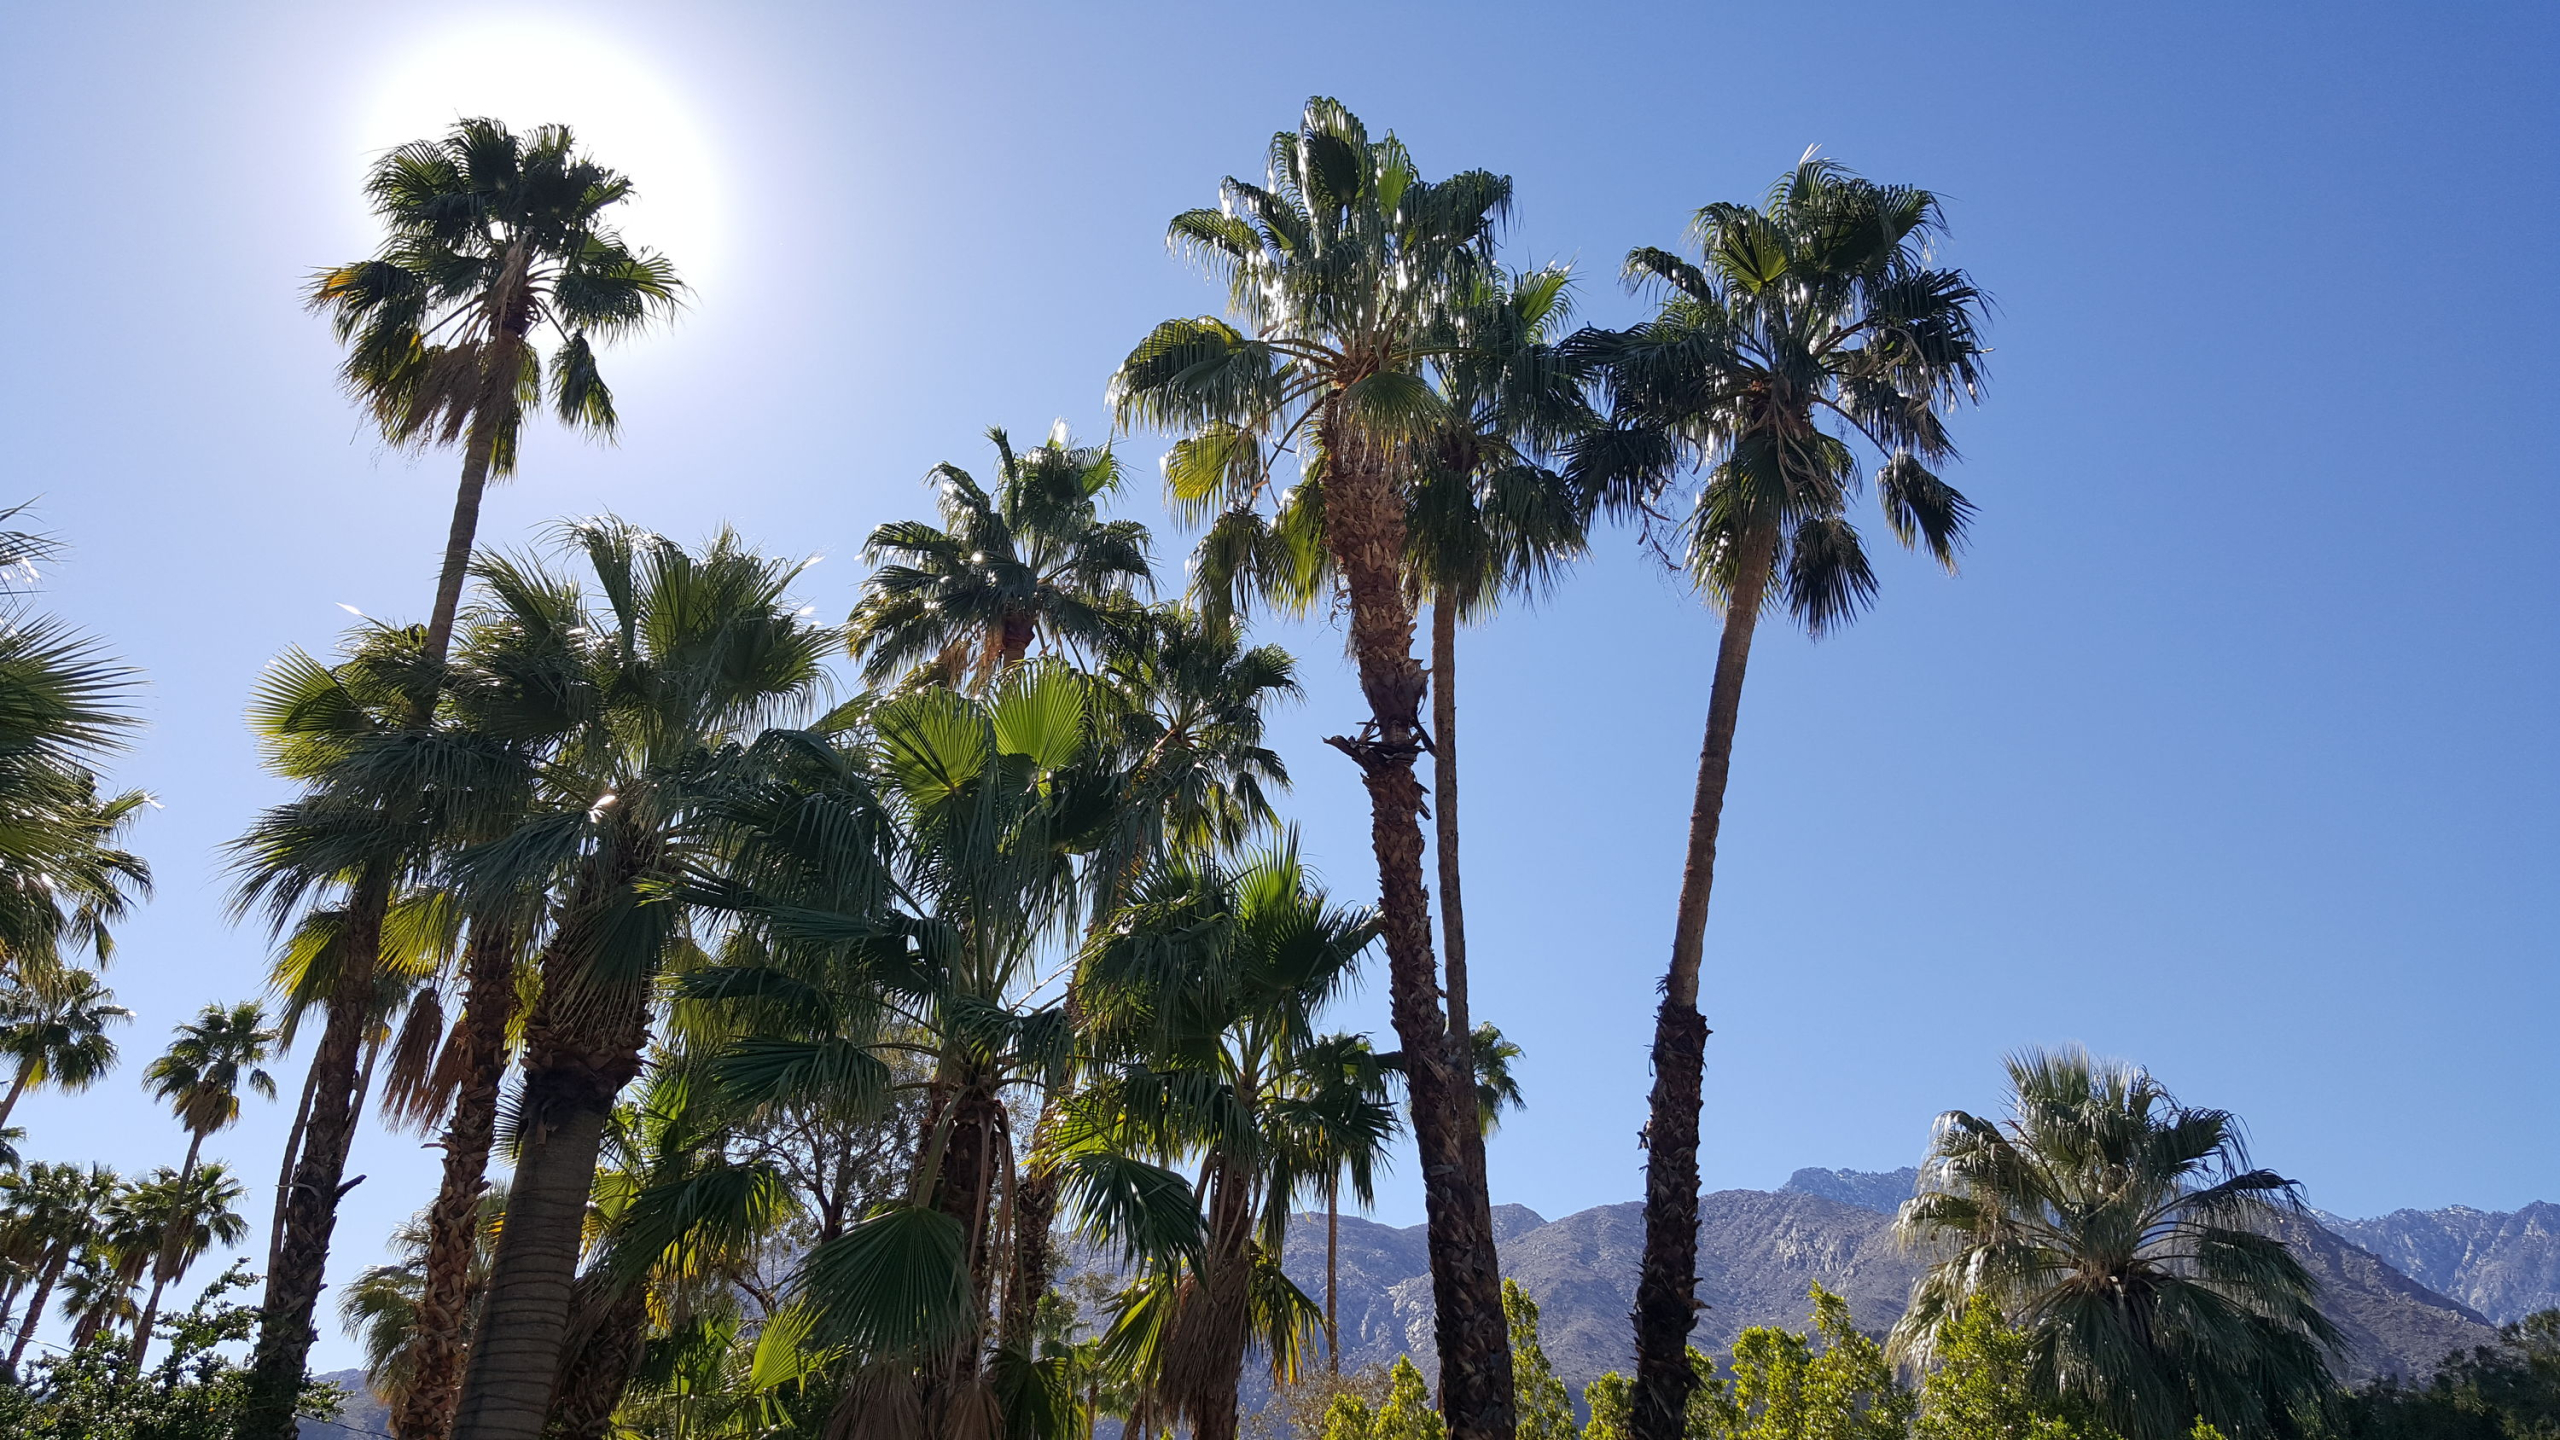 About a dozen palm trees stand tall on a clear day in Palm Springs, California